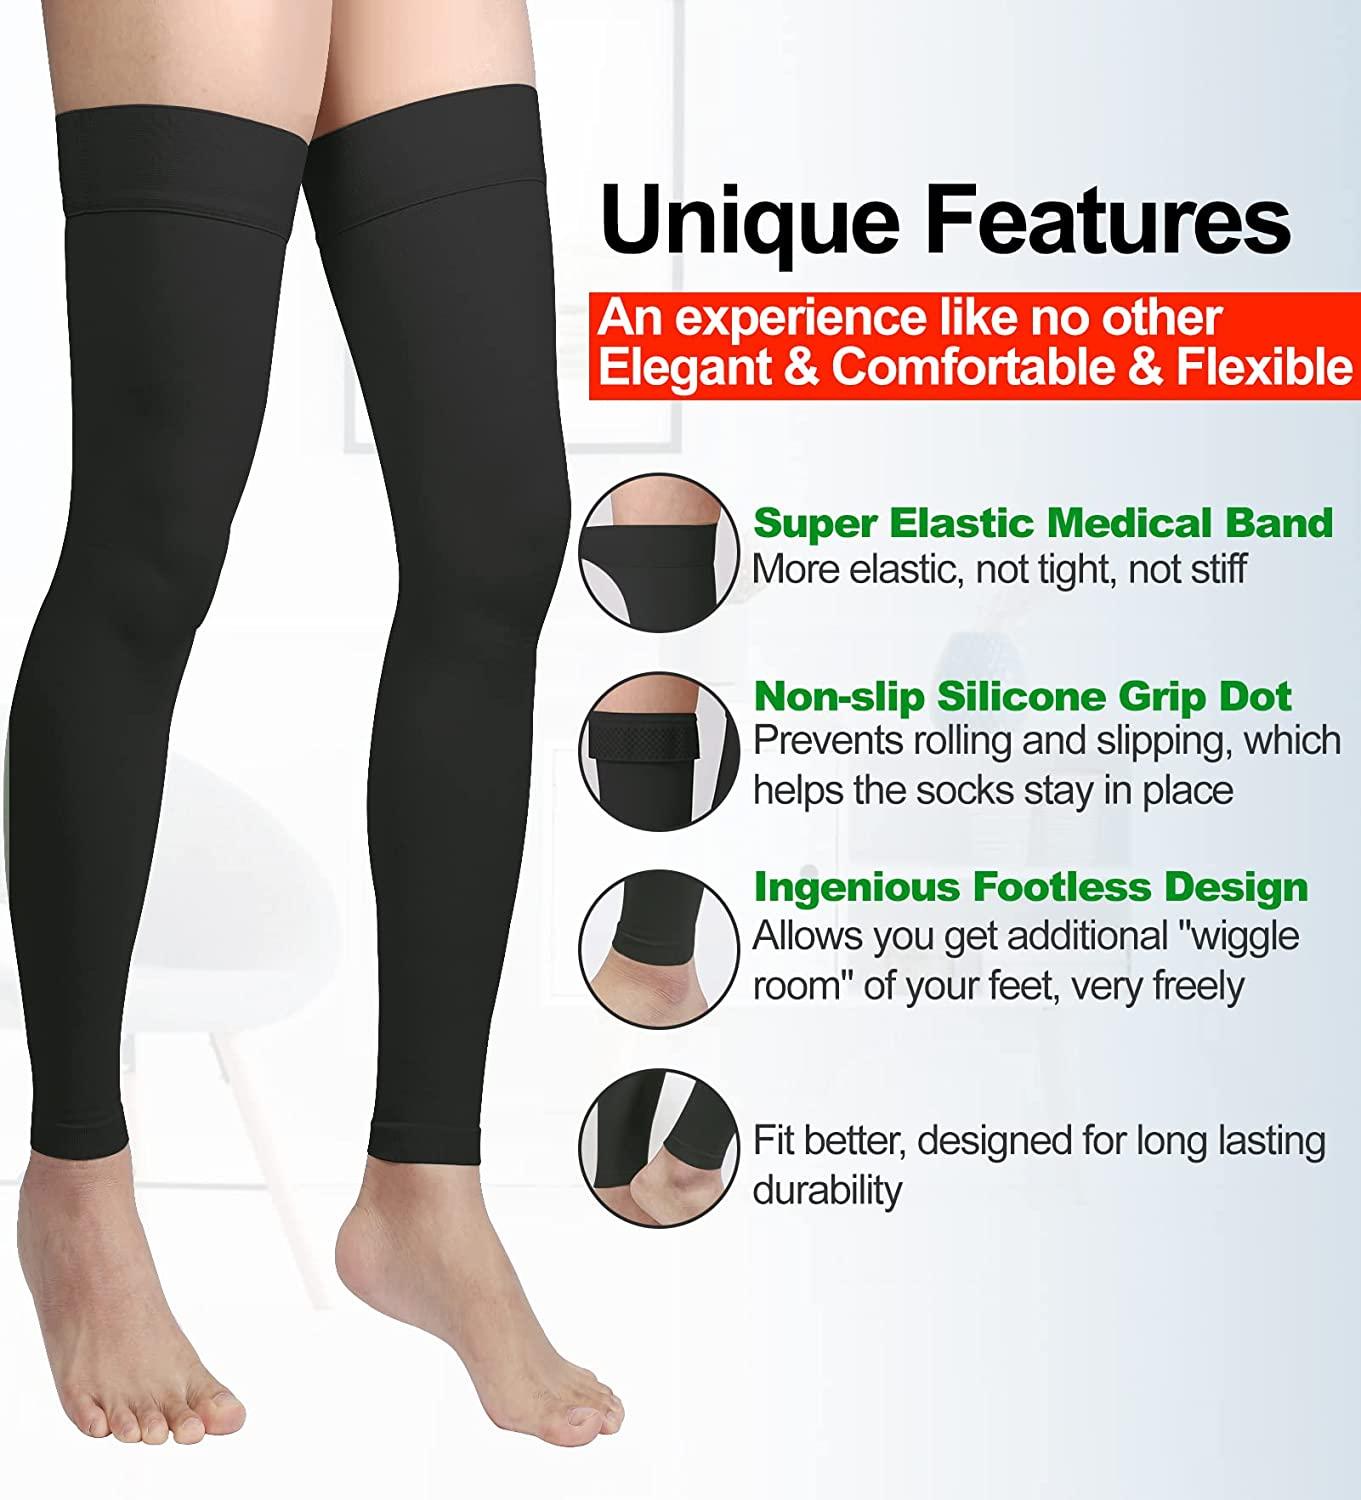 Compression stockings slip or are too tight. What can you do about